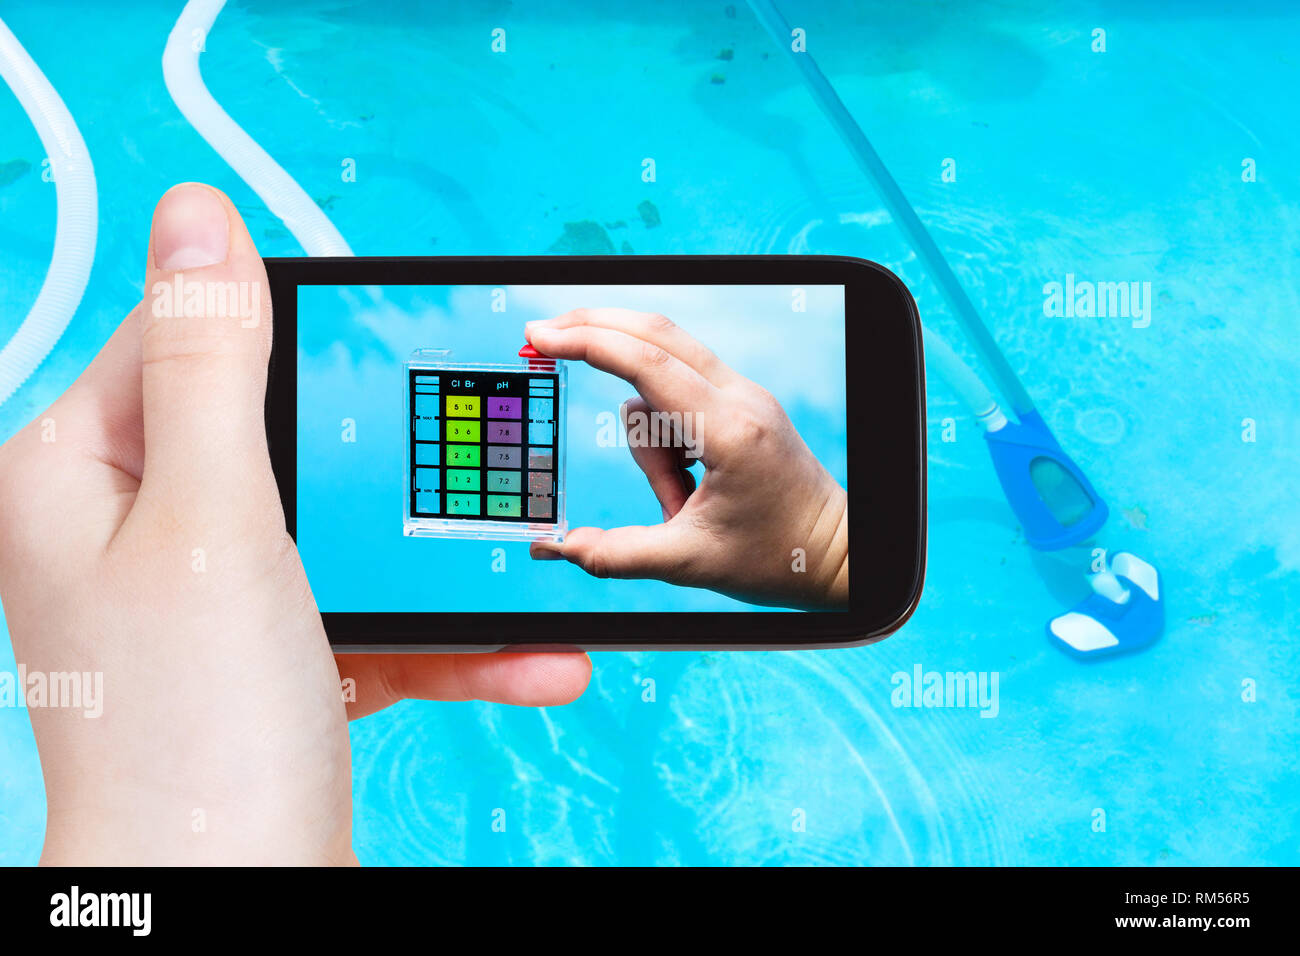 travel concept - tourist photographs of a hand holding the pH indicator for measure the acidity of water in a outdoor swimming pool on smartphone Stock Photo